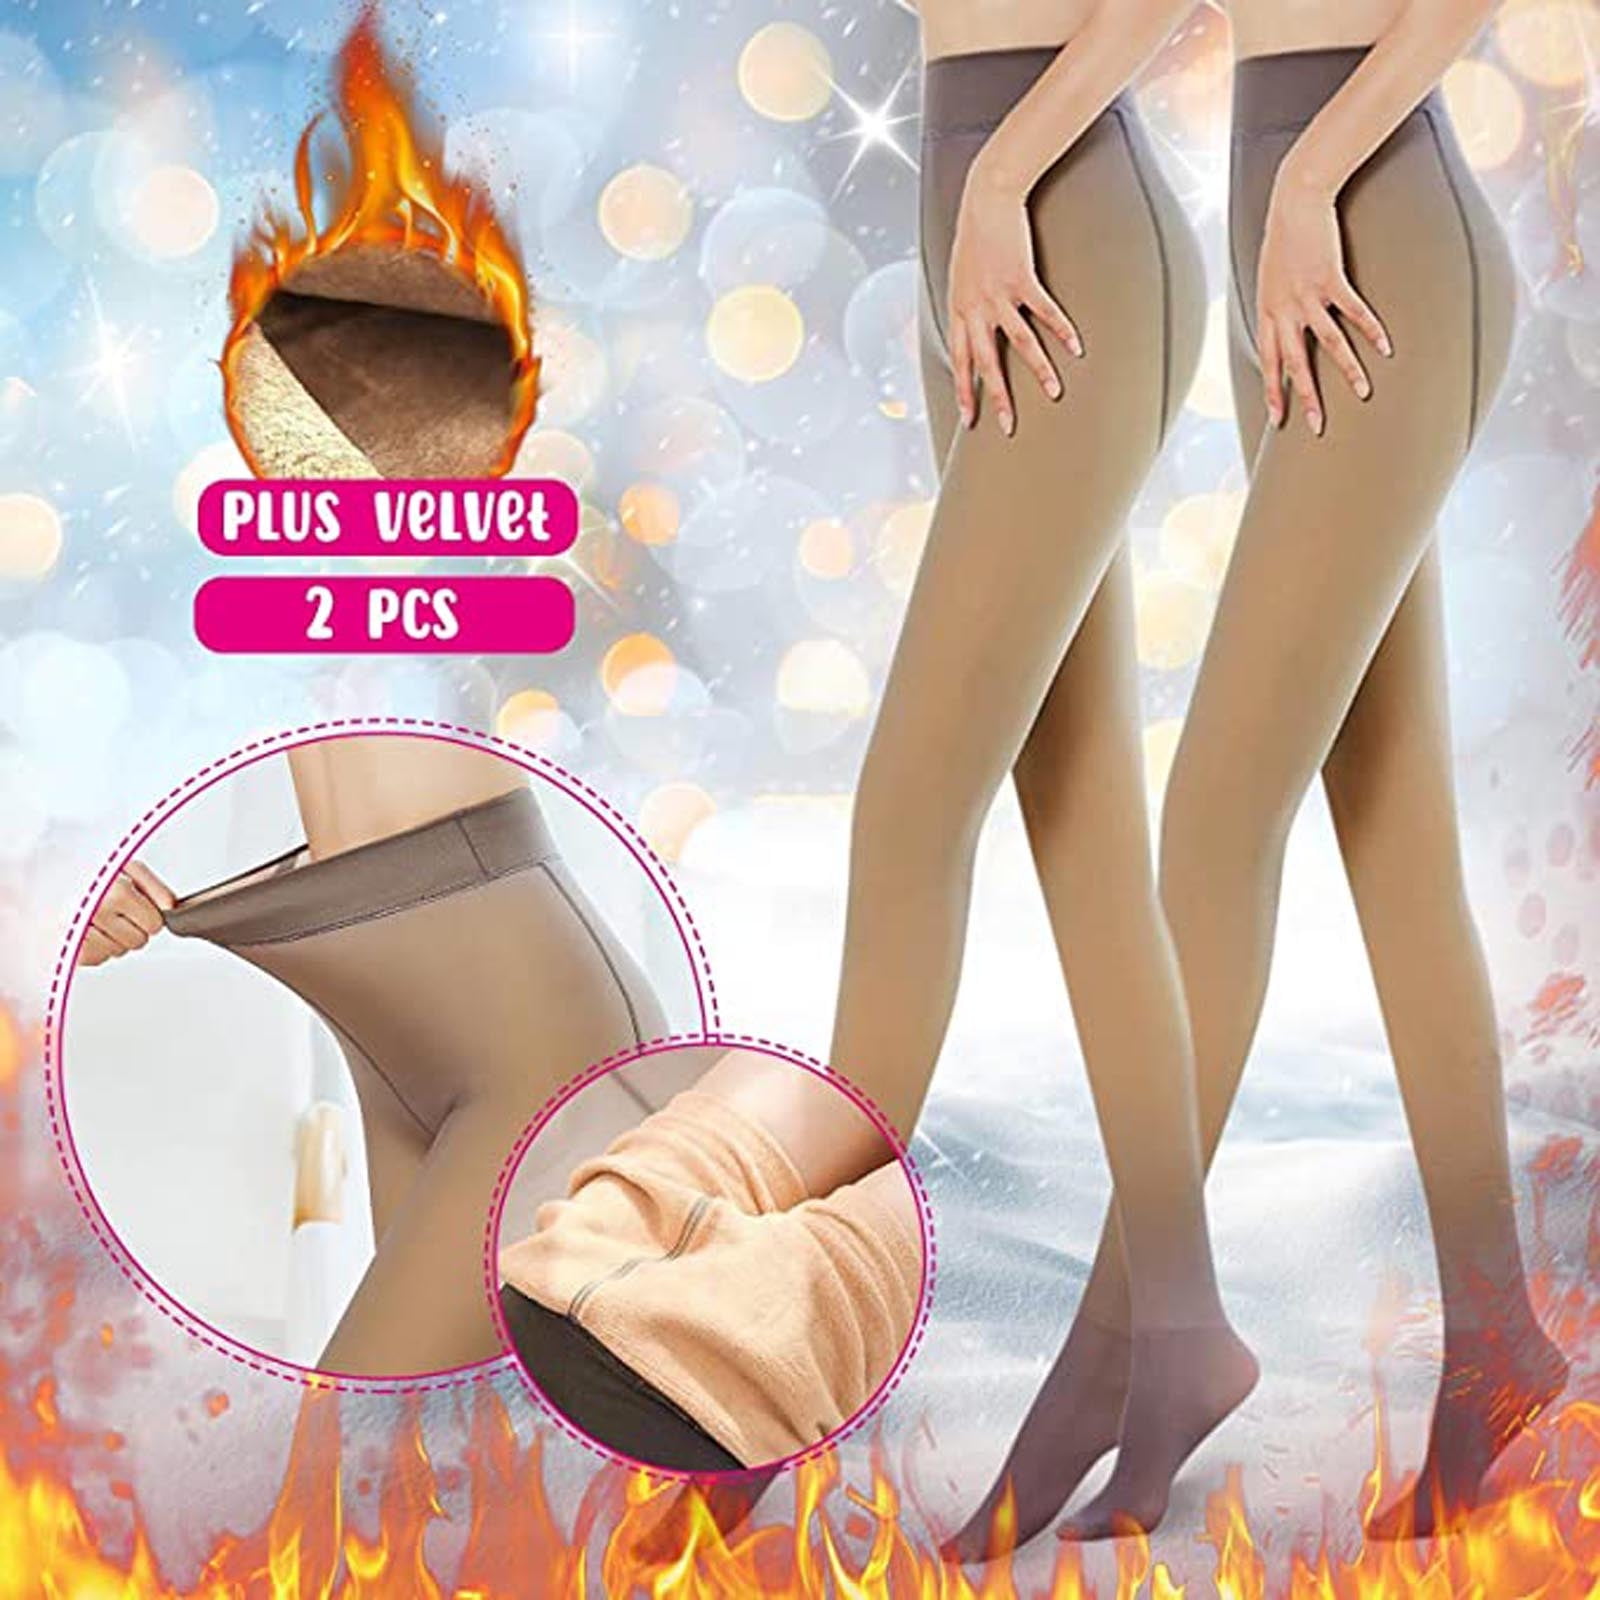 JBEELATE Women's Fleece Lined Tights Thick Pantyhose Translucent